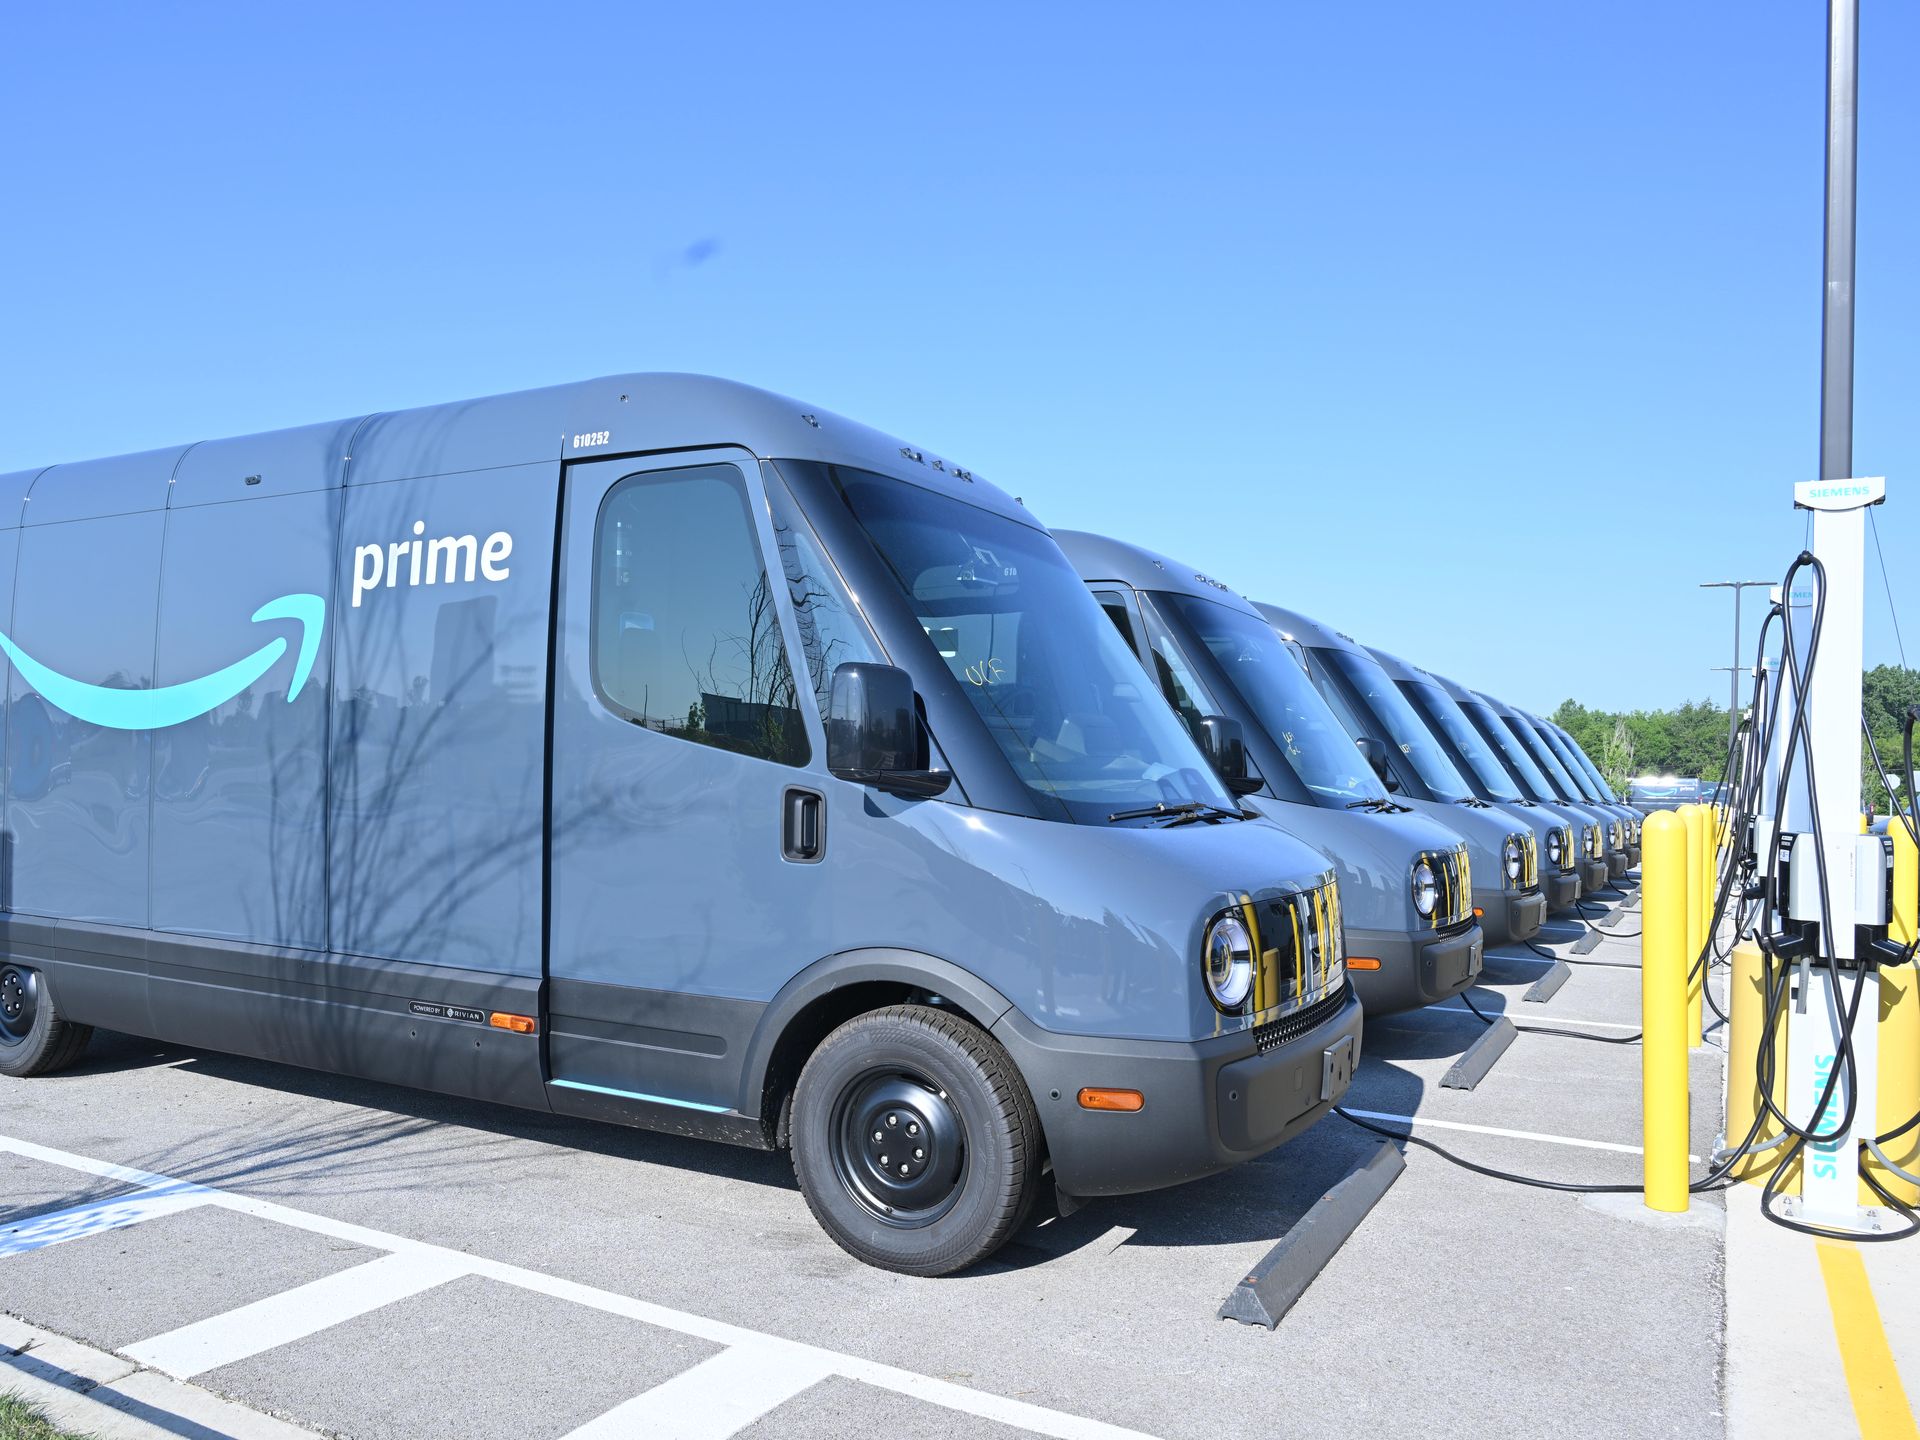 Creating a Fleet of 100,000 Electric Delivery Vehicles